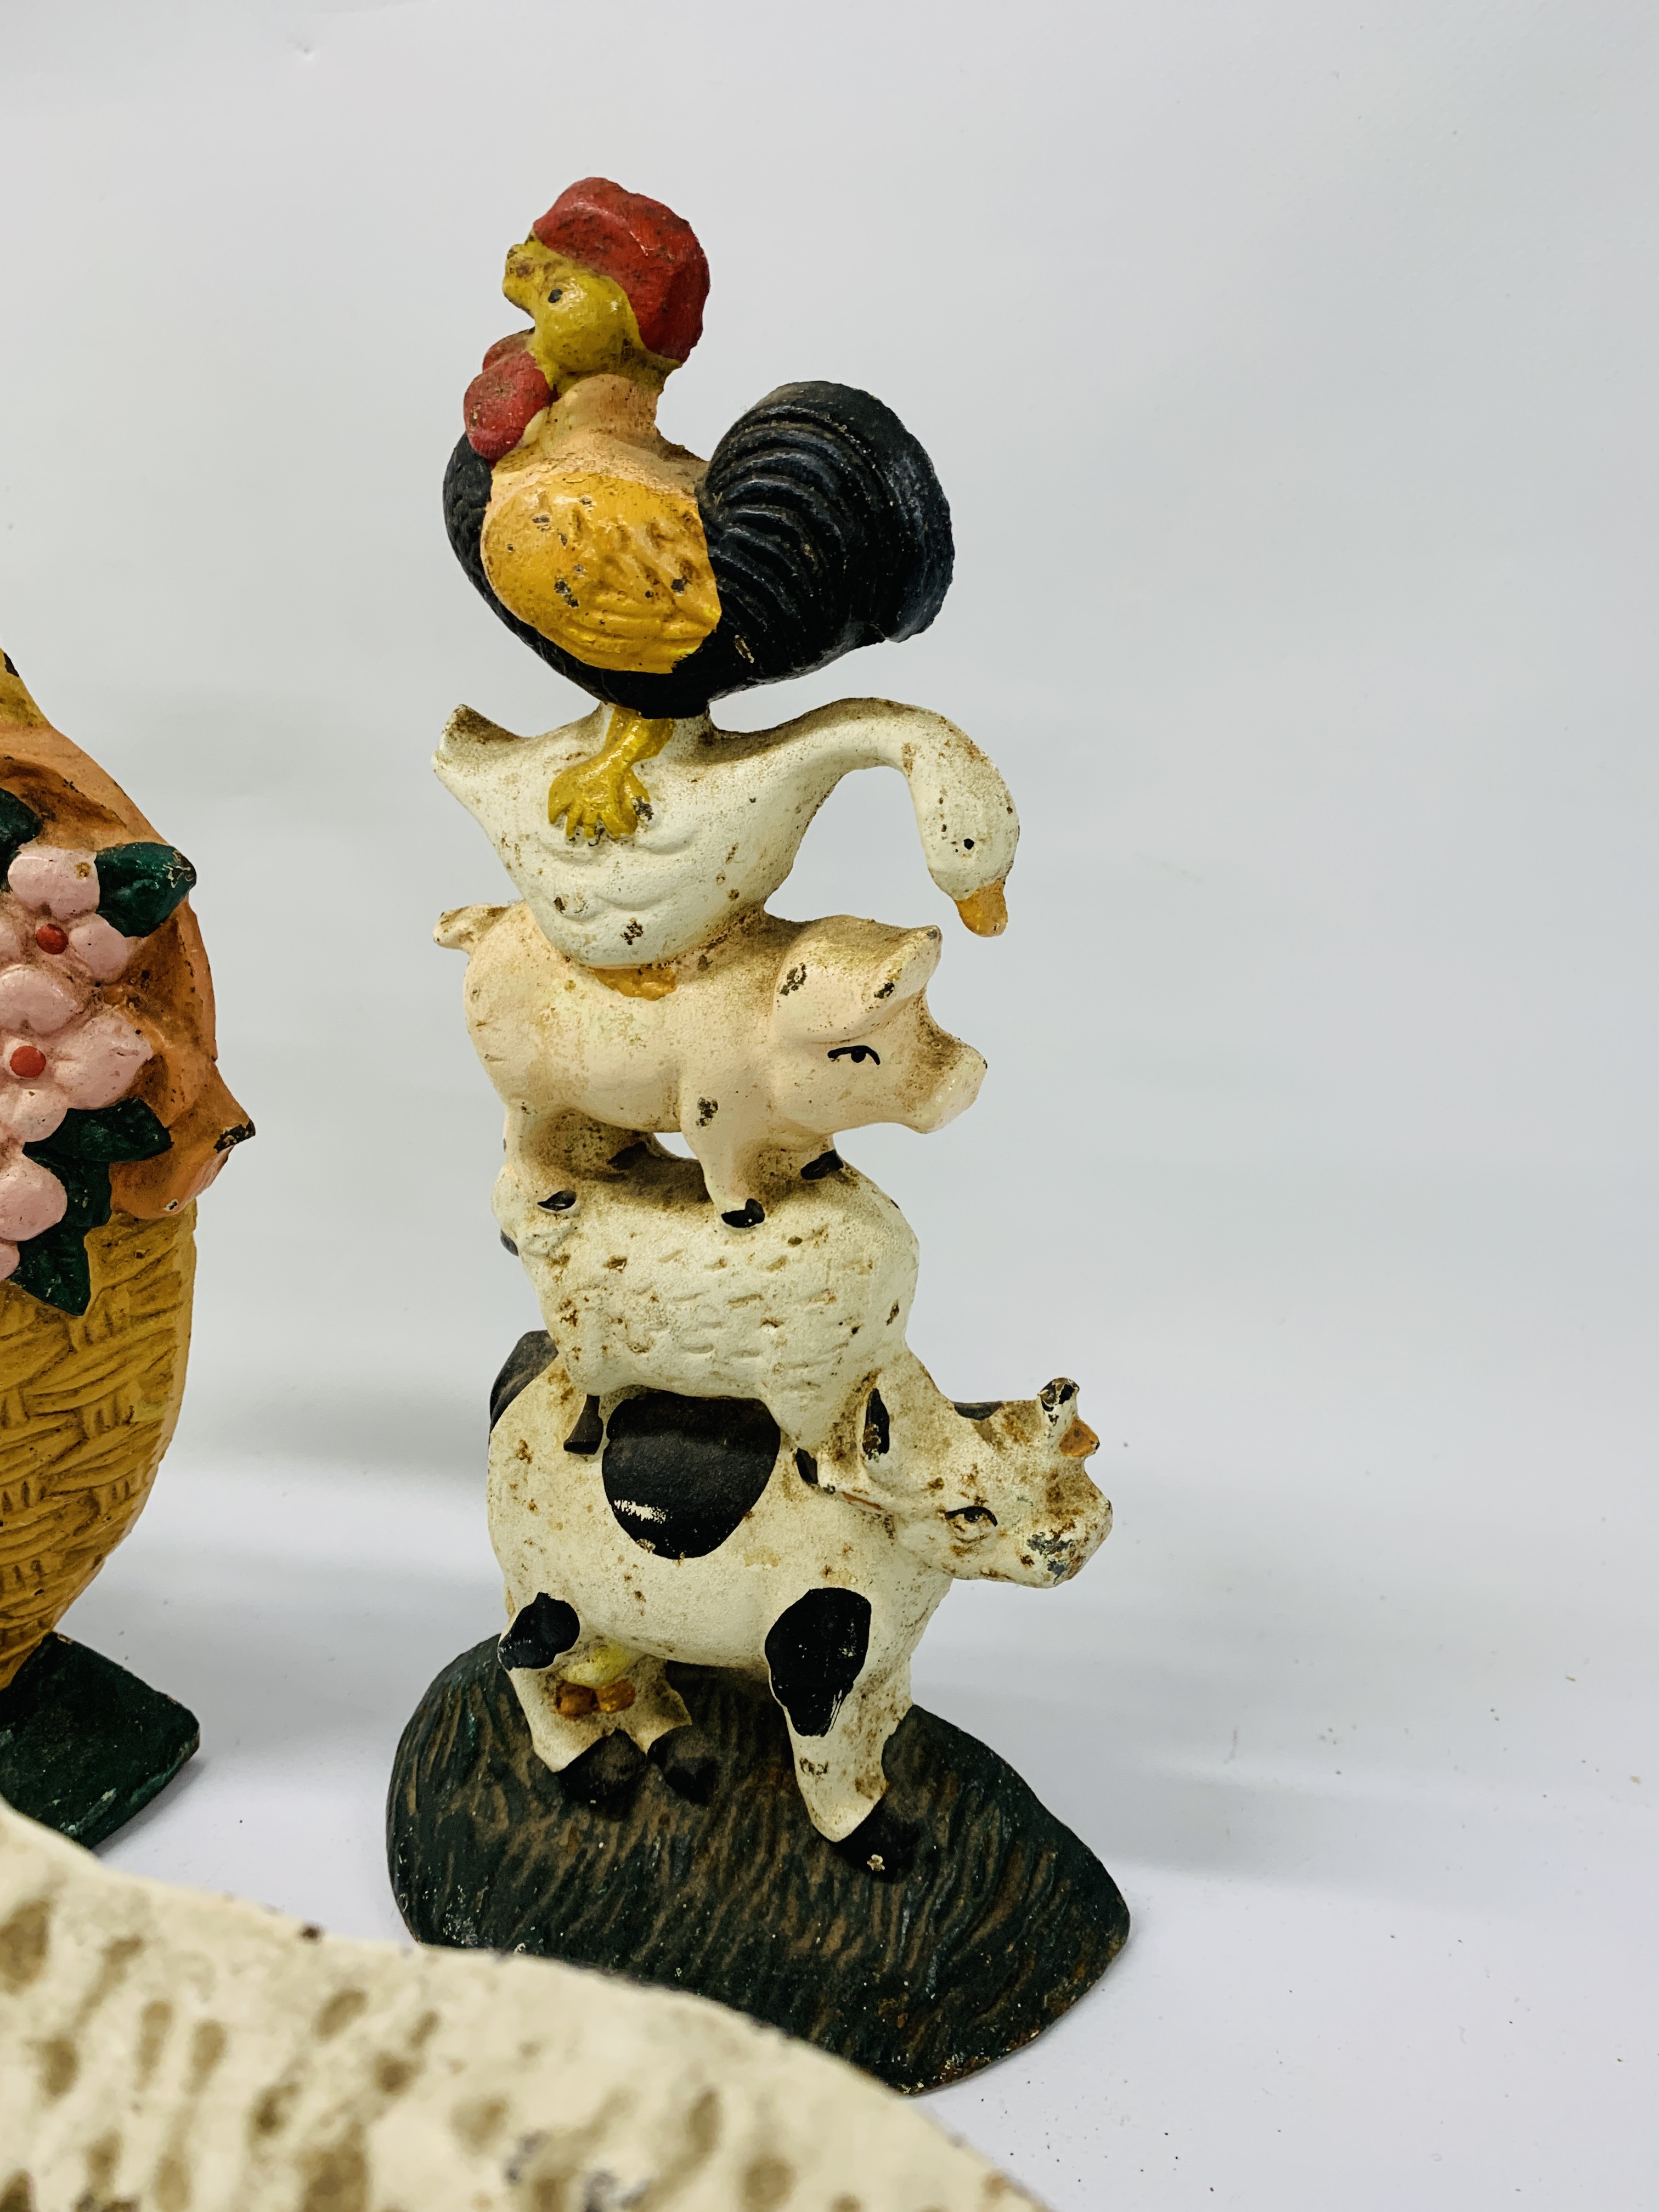 COLLECTION OF CAST REPRODUCTION DOORSTOPS TO INCLUDE EASTER BUNNIES, DUCKS, PIGS, ETC. - Image 8 of 8